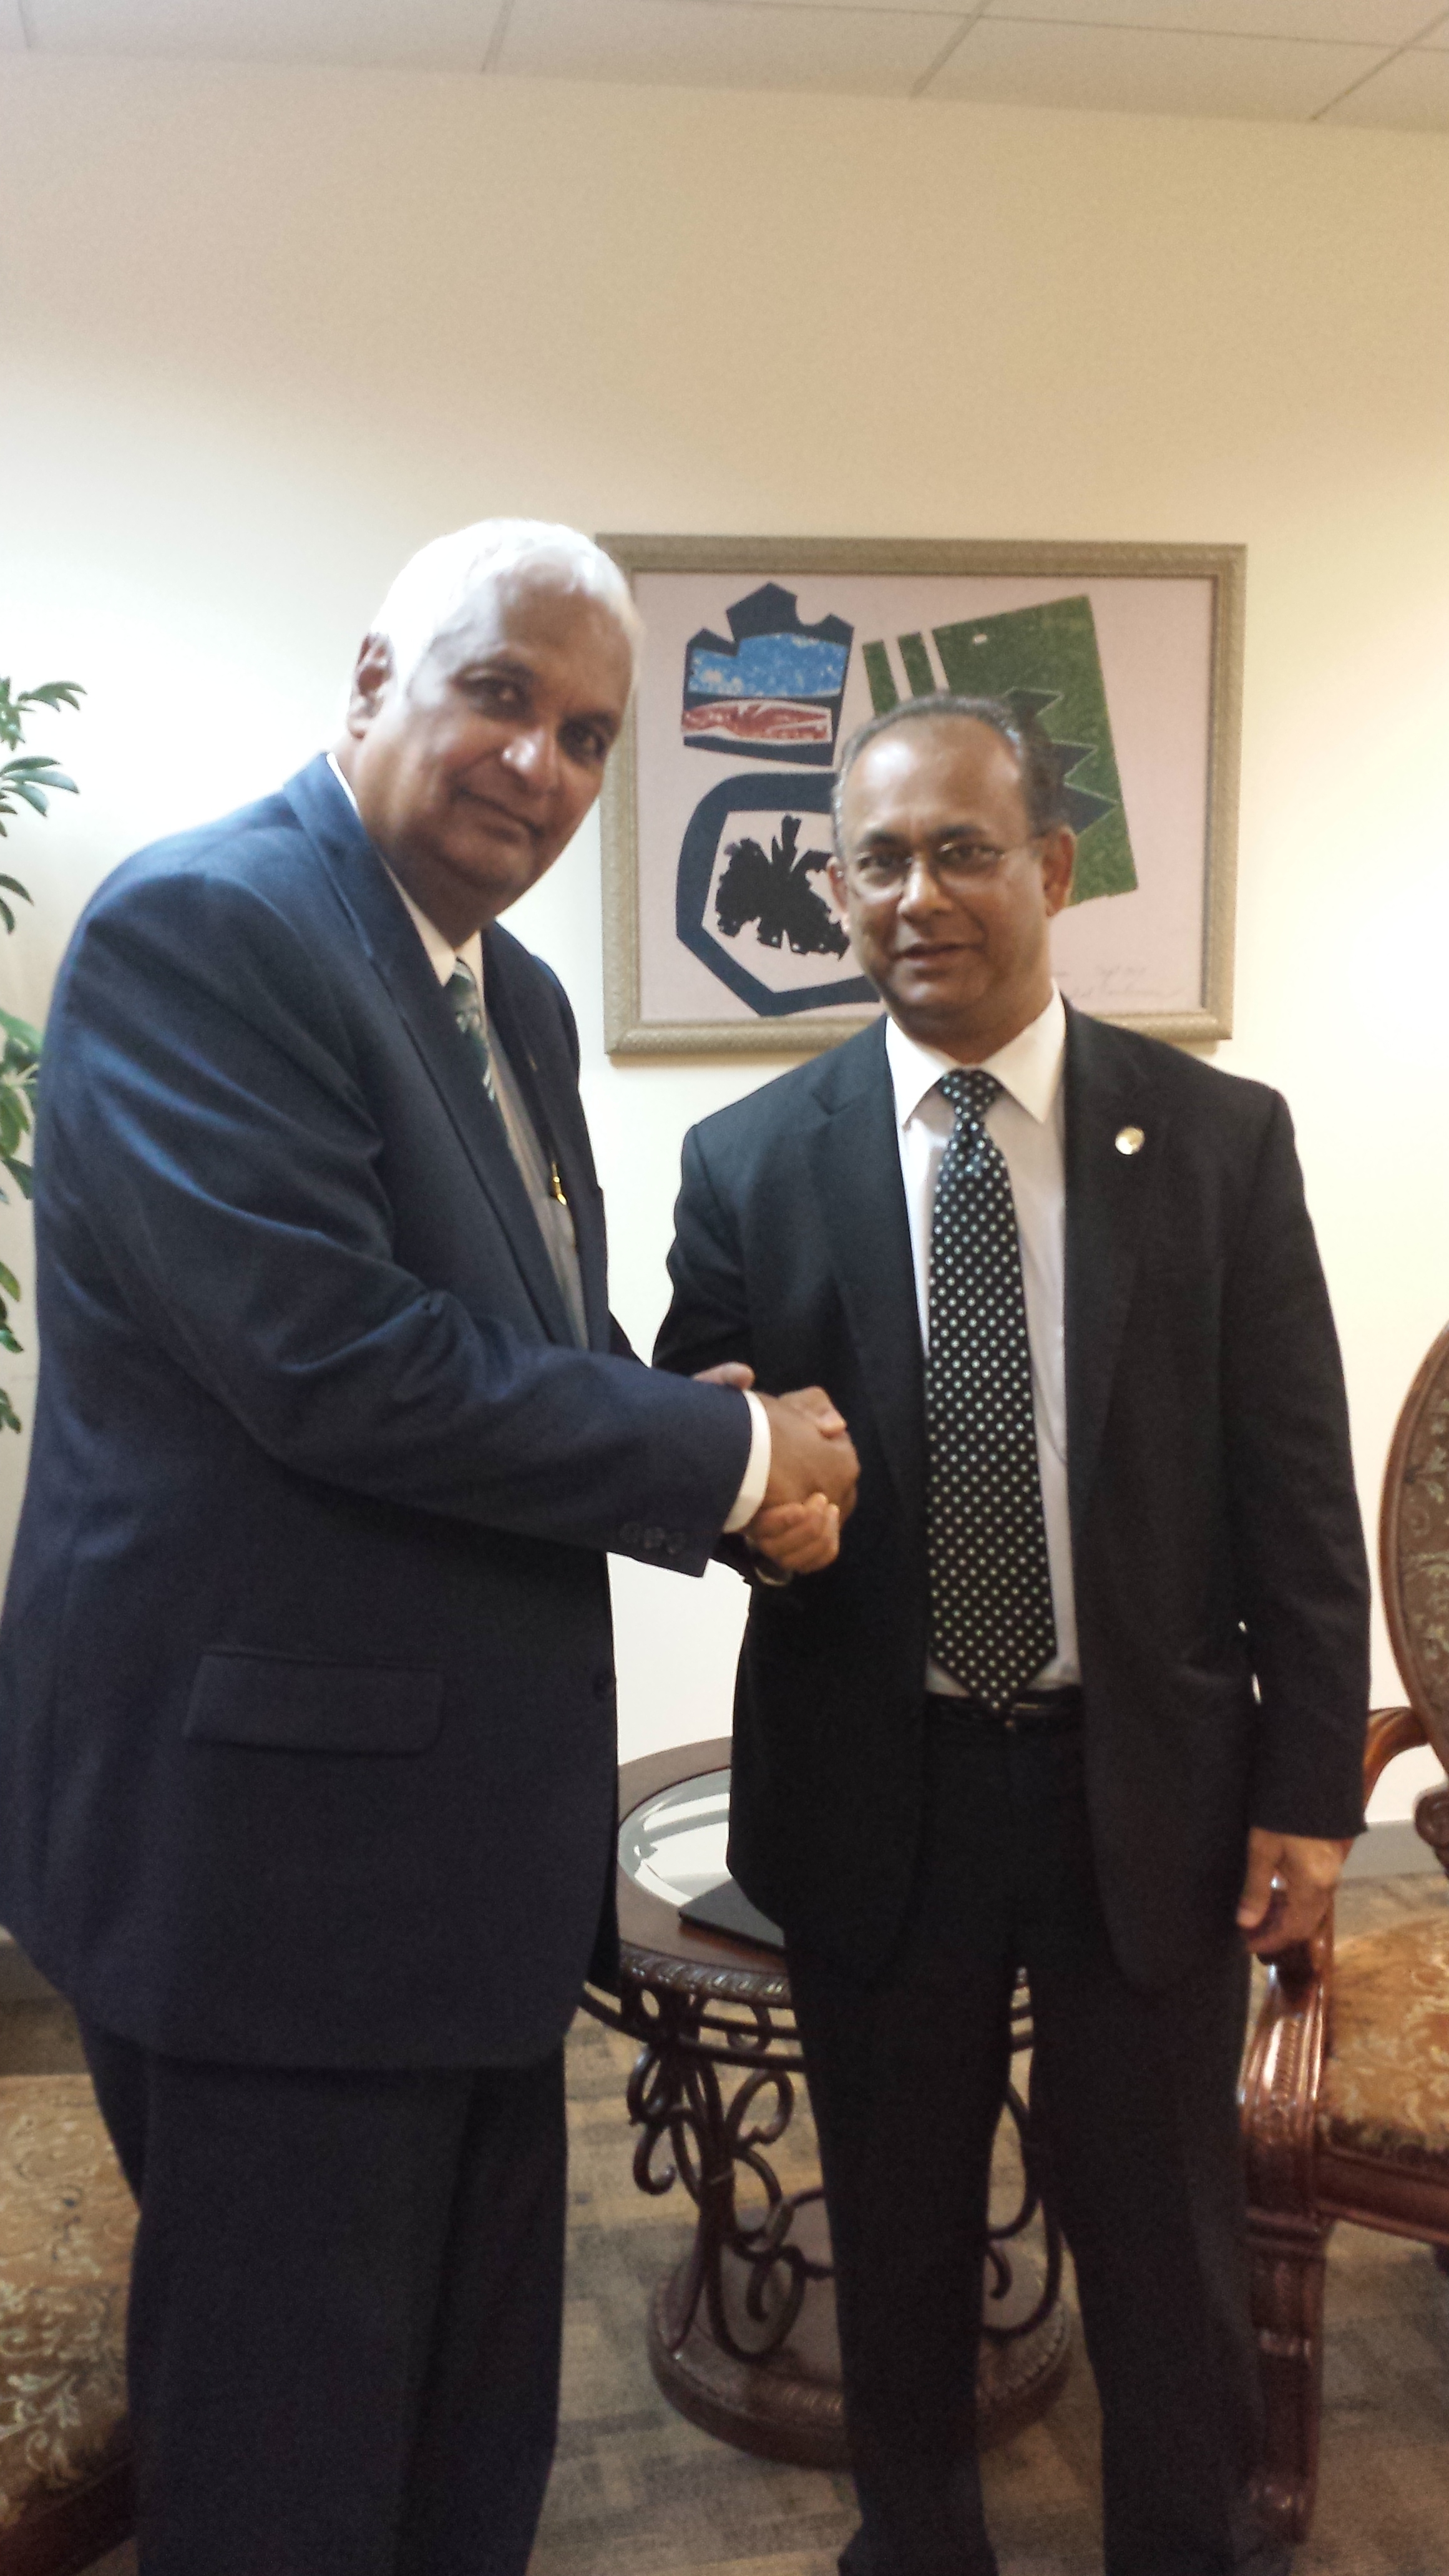 Ambassador Albert Ramdin meets with Hon. Winston Dookeran, Minister of Foreign Affairs of Trinidad and Tobago, during an official visit on February 16-18, 2014